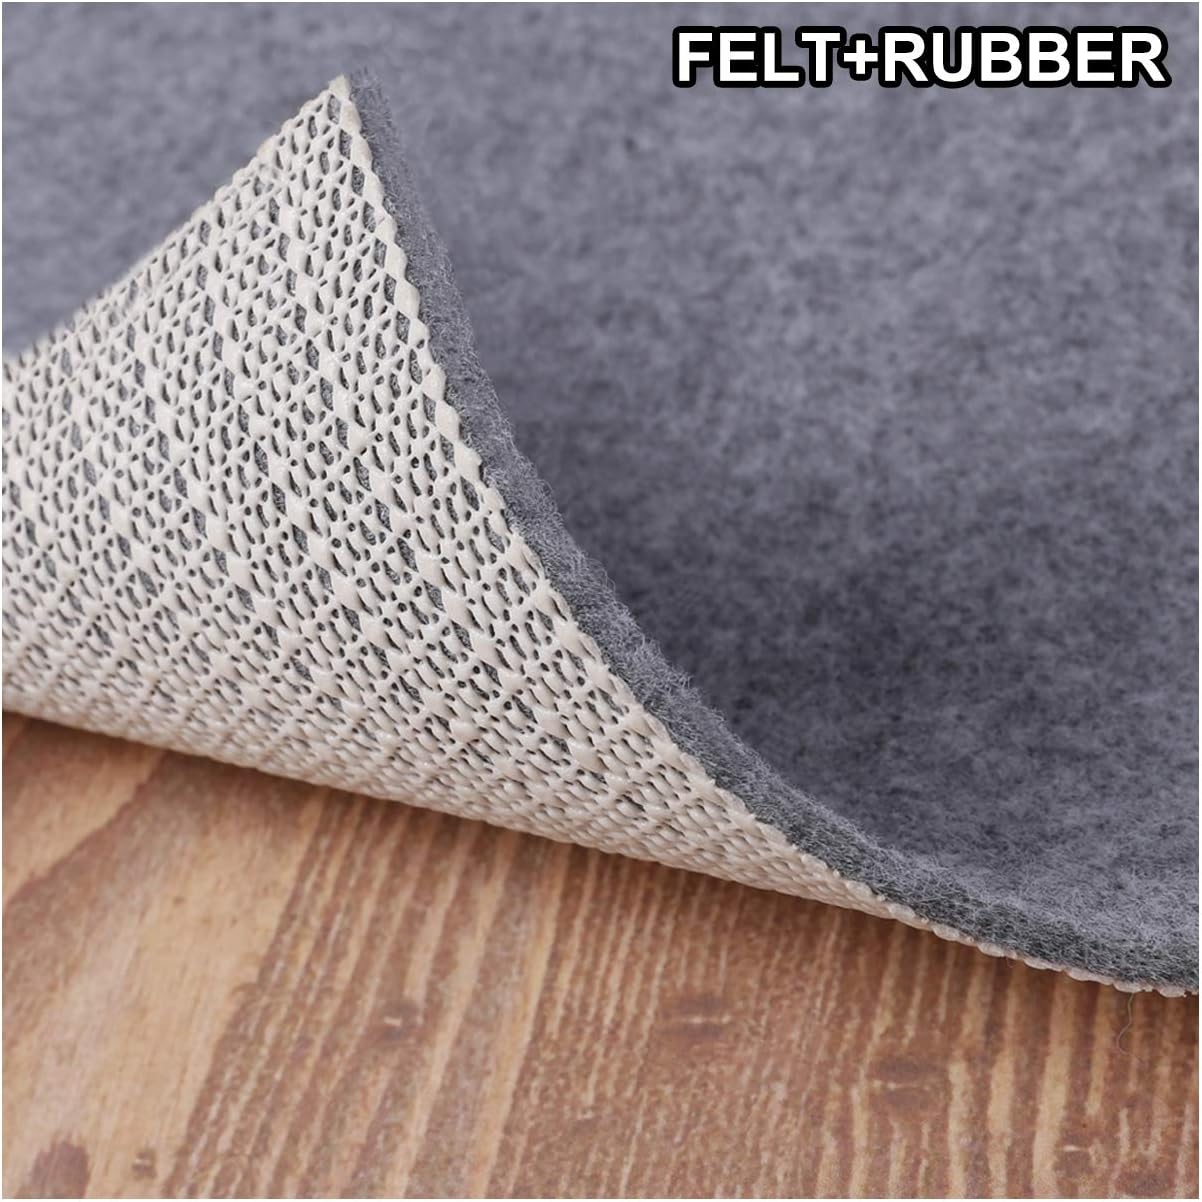 Enjoy Holiday 1981 Non Slip Pad Rug Grippers - 8x10, 1/8" Thick, (Felt + Rubber) Double Layers Area Carpet Mat Tap, Provides Protection and Cushioning for Hardwood or Tile Floors